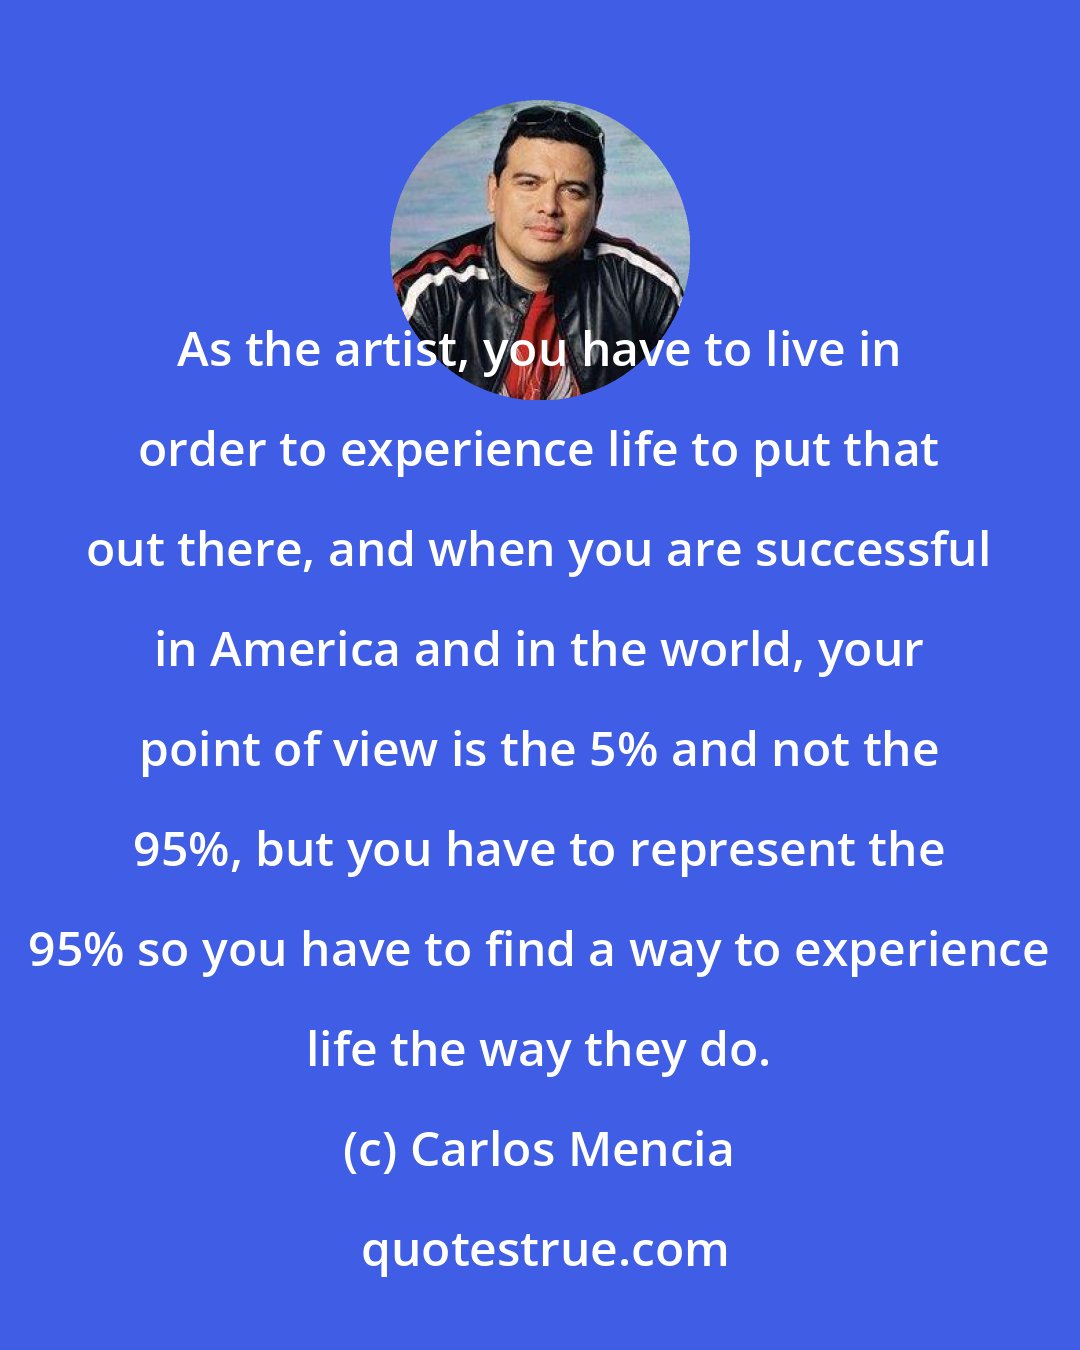 Carlos Mencia: As the artist, you have to live in order to experience life to put that out there, and when you are successful in America and in the world, your point of view is the 5% and not the 95%, but you have to represent the 95% so you have to find a way to experience life the way they do.